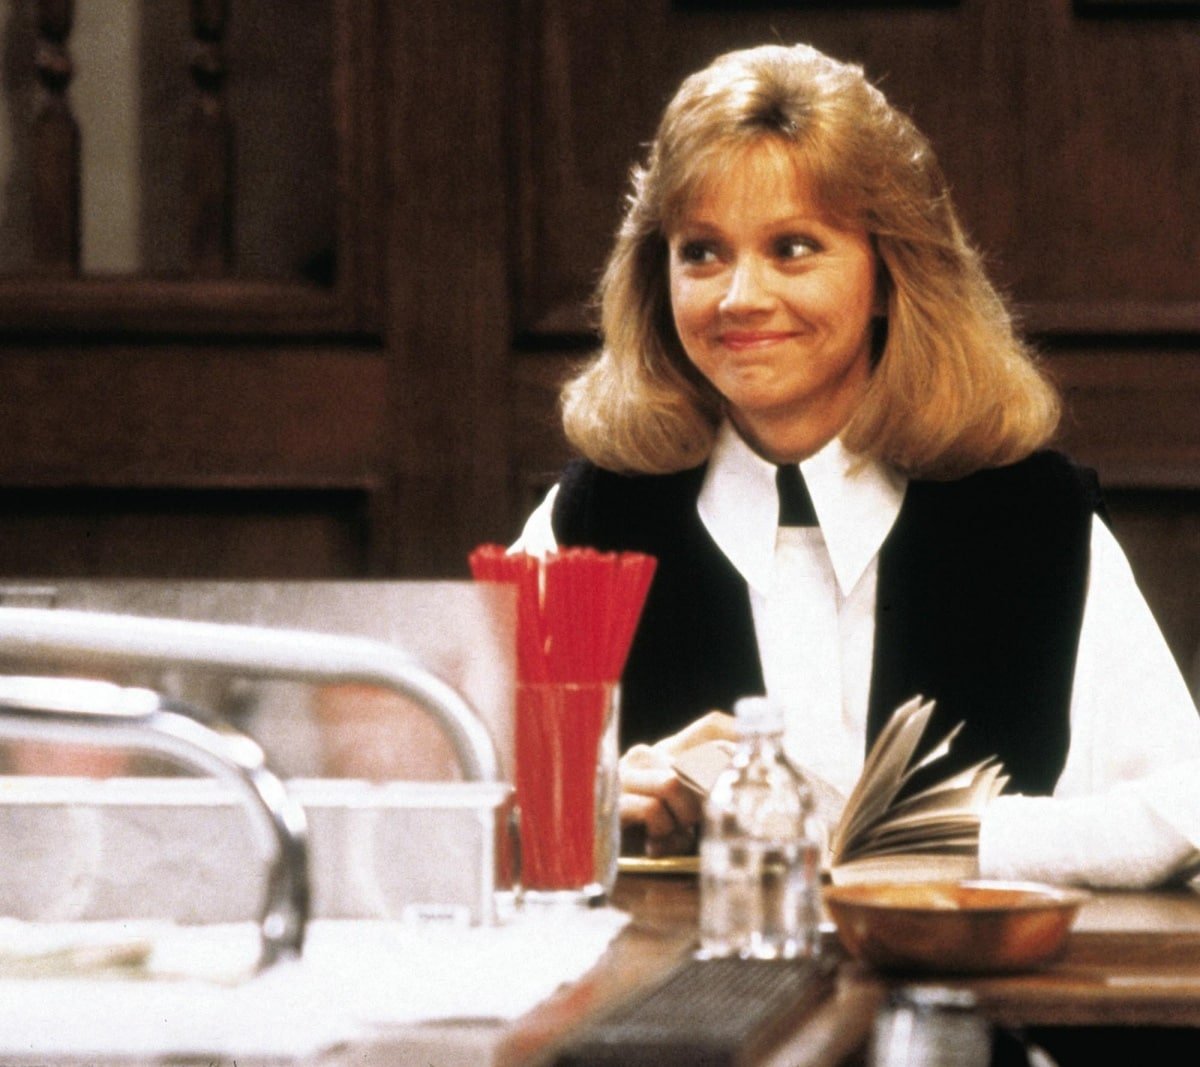 Shelley Long as Diane Chambers in the popular sitcom television series Cheers